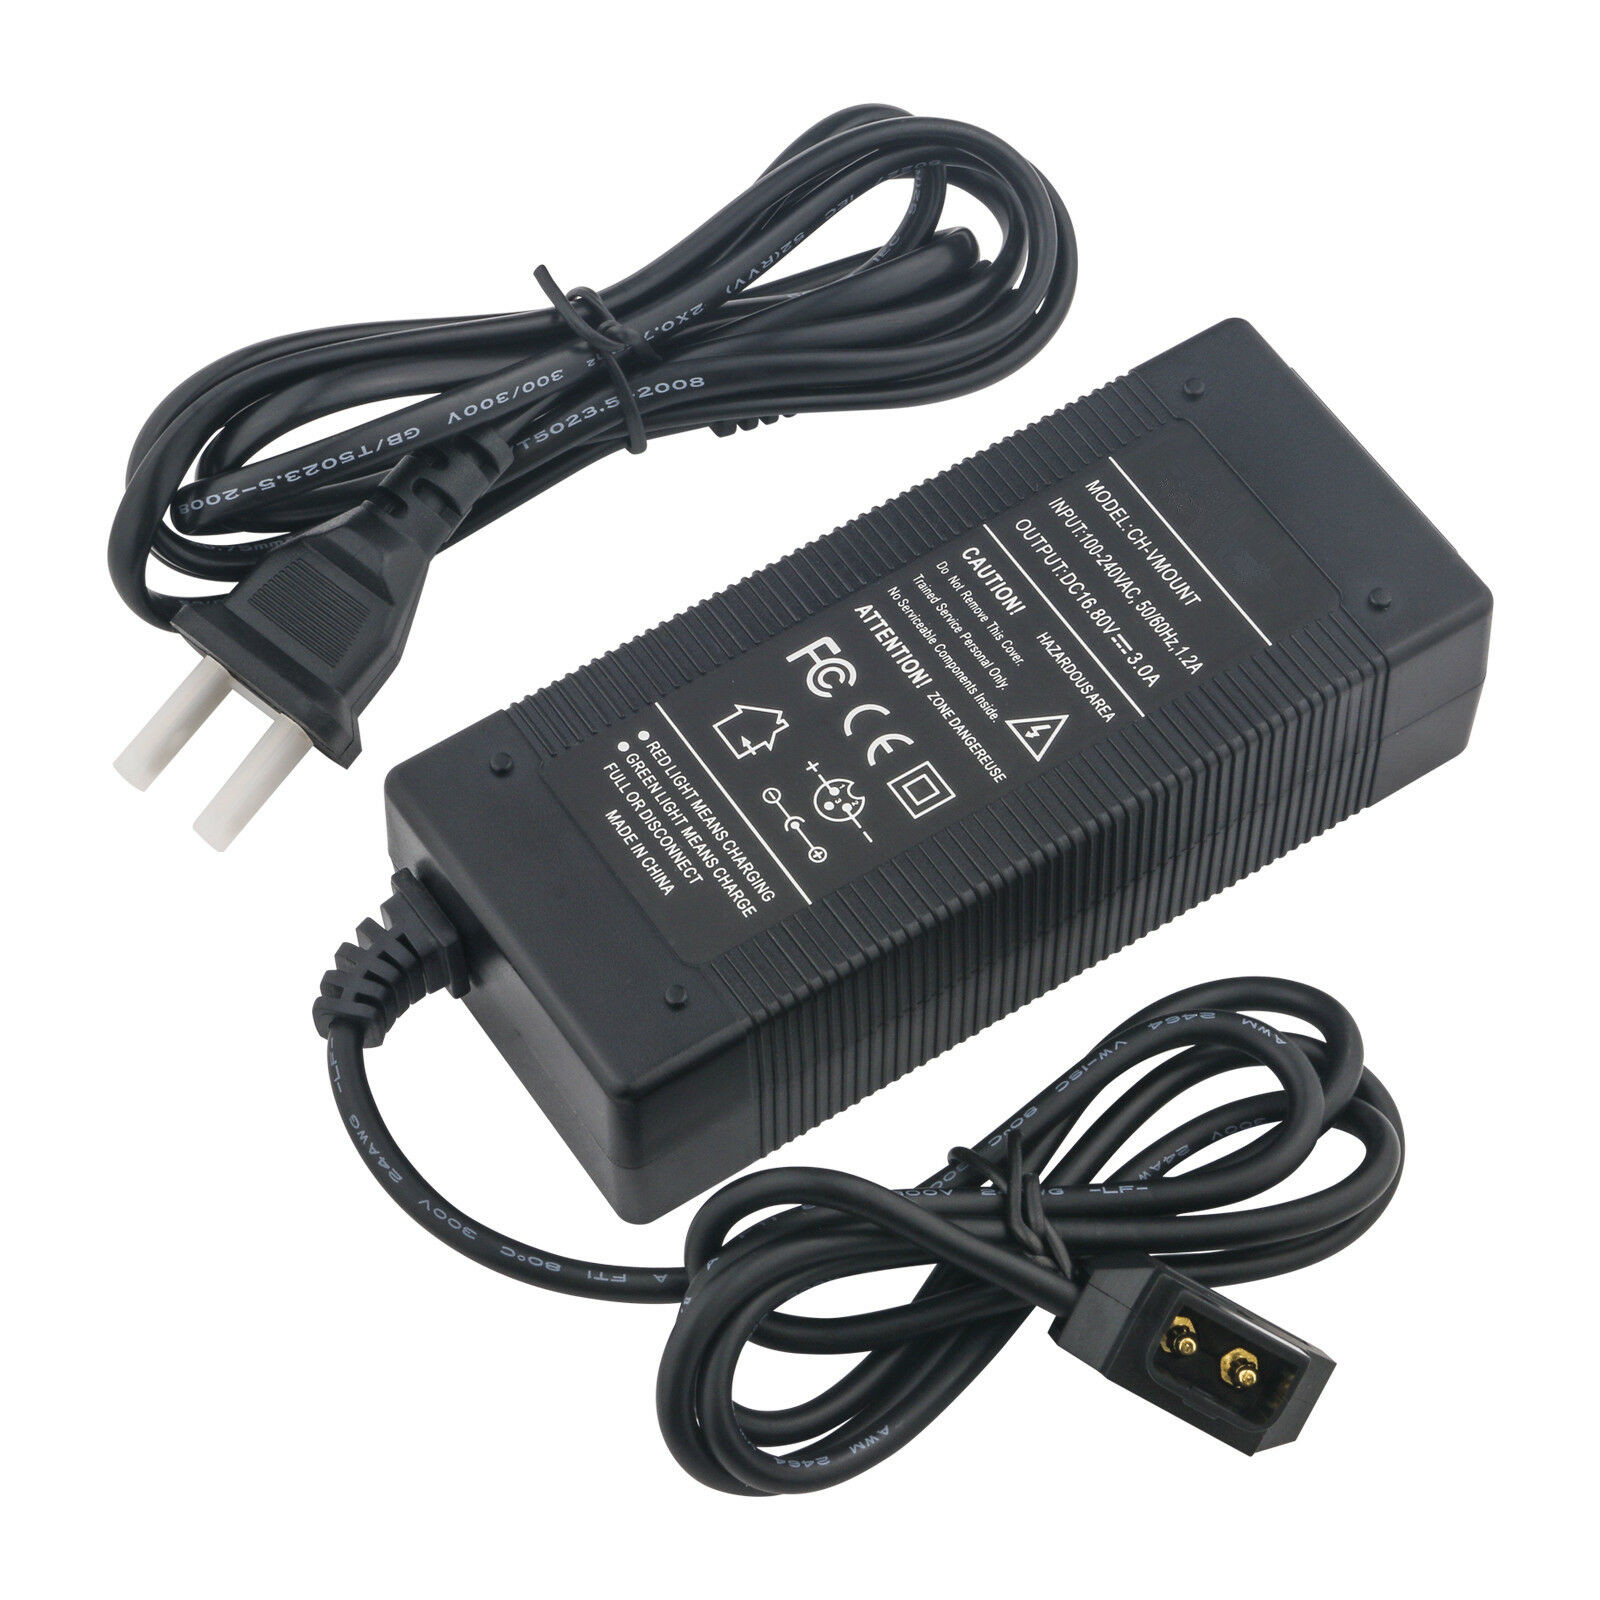 SONY DNV-7 battery charger